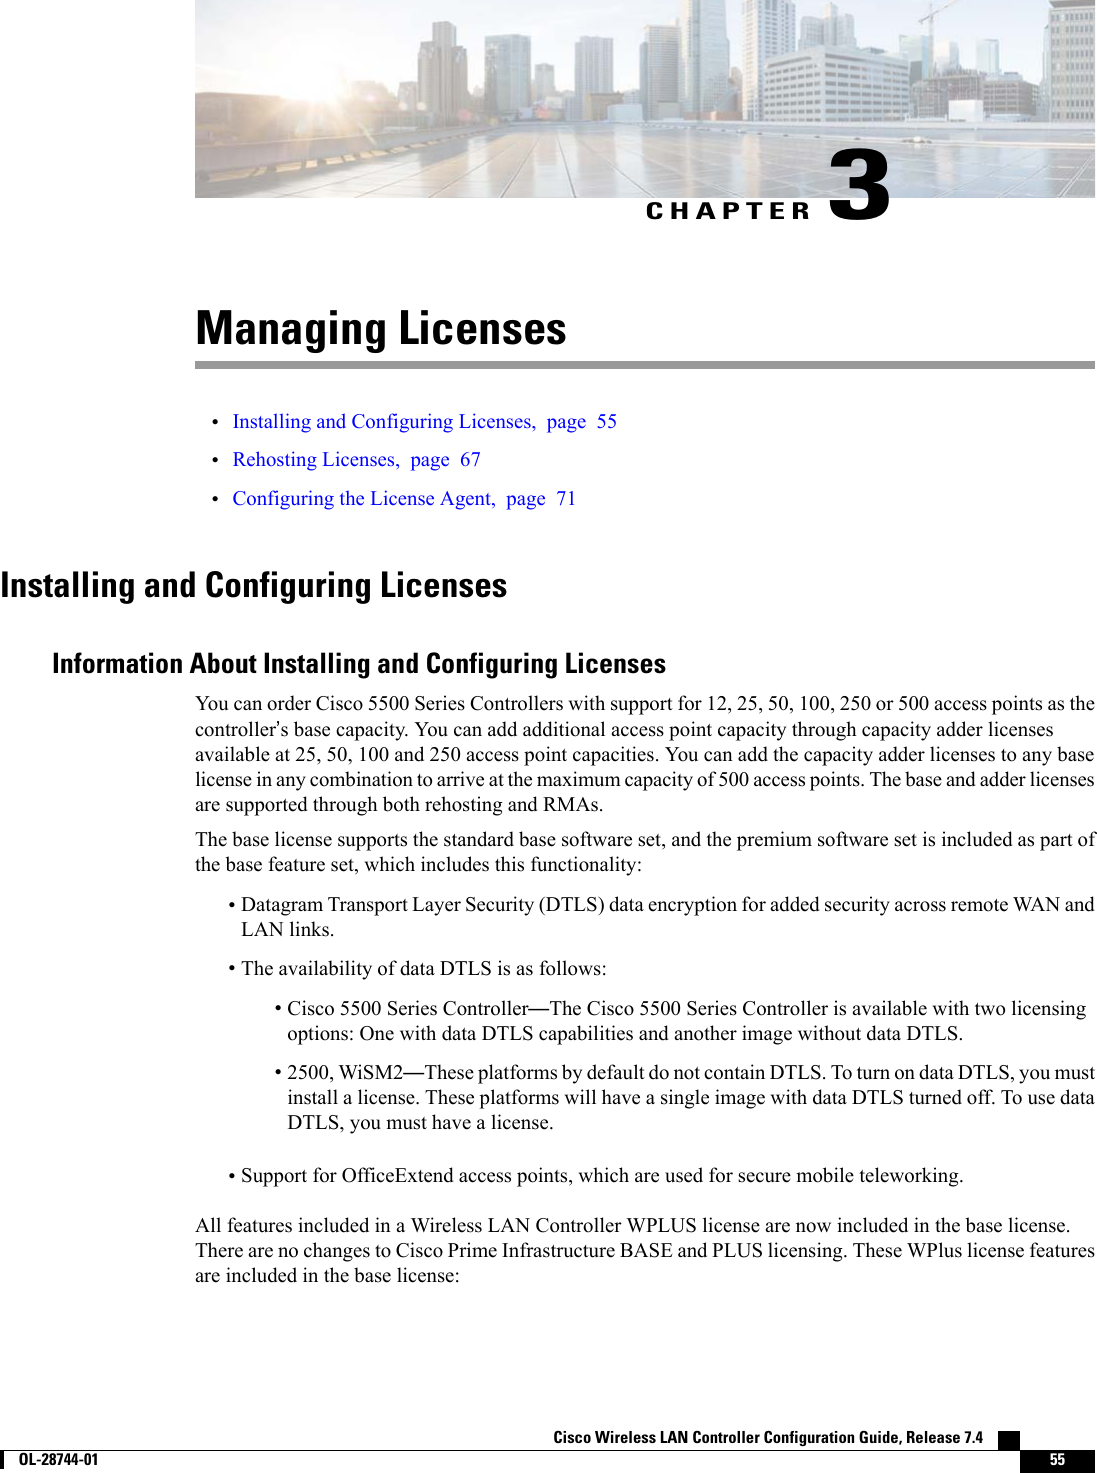 CHAPTER 3Managing Licenses•Installing and Configuring Licenses, page 55•Rehosting Licenses, page 67•Configuring the License Agent, page 71Installing and Configuring LicensesInformation About Installing and Configuring LicensesYou can order Cisco 5500 Series Controllers with support for 12, 25, 50, 100, 250 or 500 access points as thecontroller’s base capacity. You can add additional access point capacity through capacity adder licensesavailable at 25, 50, 100 and 250 access point capacities. You can add the capacity adder licenses to any baselicense in any combination to arrive at the maximum capacity of 500 access points. The base and adder licensesare supported through both rehosting and RMAs.The base license supports the standard base software set, and the premium software set is included as part ofthe base feature set, which includes this functionality:•Datagram Transport Layer Security (DTLS) data encryption for added security across remote WAN andLAN links.•The availability of data DTLS is as follows:•Cisco 5500 Series Controller—The Cisco 5500 Series Controller is available with two licensingoptions: One with data DTLS capabilities and another image without data DTLS.•2500, WiSM2—These platforms by default do not contain DTLS. To turn on data DTLS, you mustinstall a license. These platforms will have a single image with data DTLS turned off. To use dataDTLS, you must have a license.•Support for OfficeExtend access points, which are used for secure mobile teleworking.All features included in a Wireless LAN Controller WPLUS license are now included in the base license.There are no changes to Cisco Prime Infrastructure BASE and PLUS licensing. These WPlus license featuresare included in the base license:Cisco Wireless LAN Controller Configuration Guide, Release 7.4        OL-28744-01 55